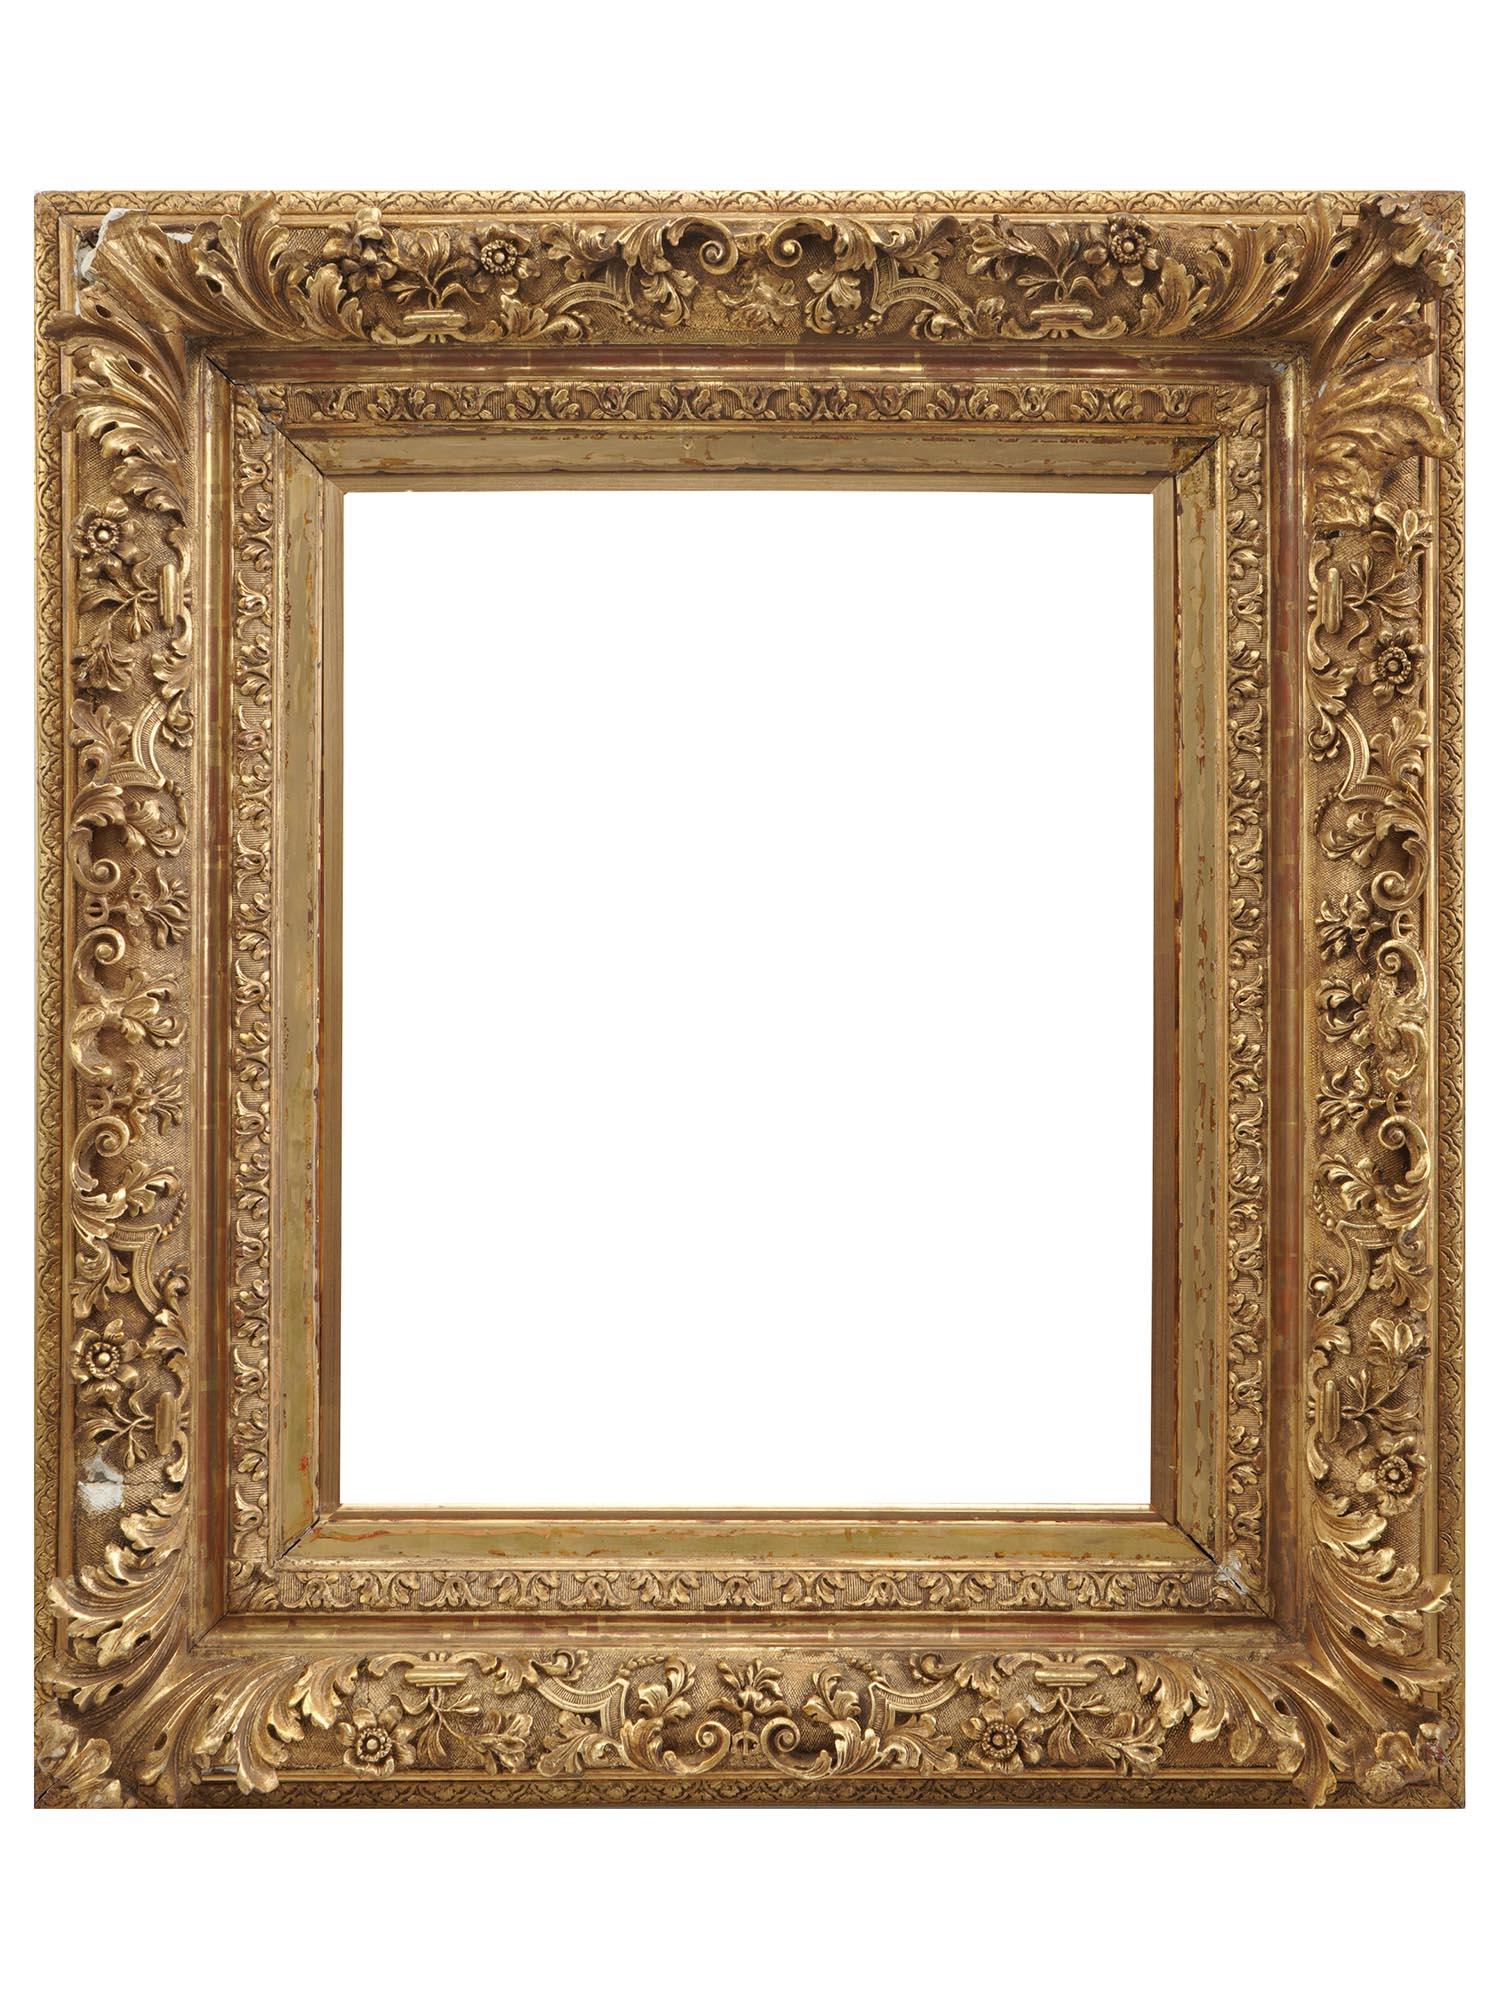 ANTIQUE ORNATE GILT WOODEN PICTURE FRAME PIC-0